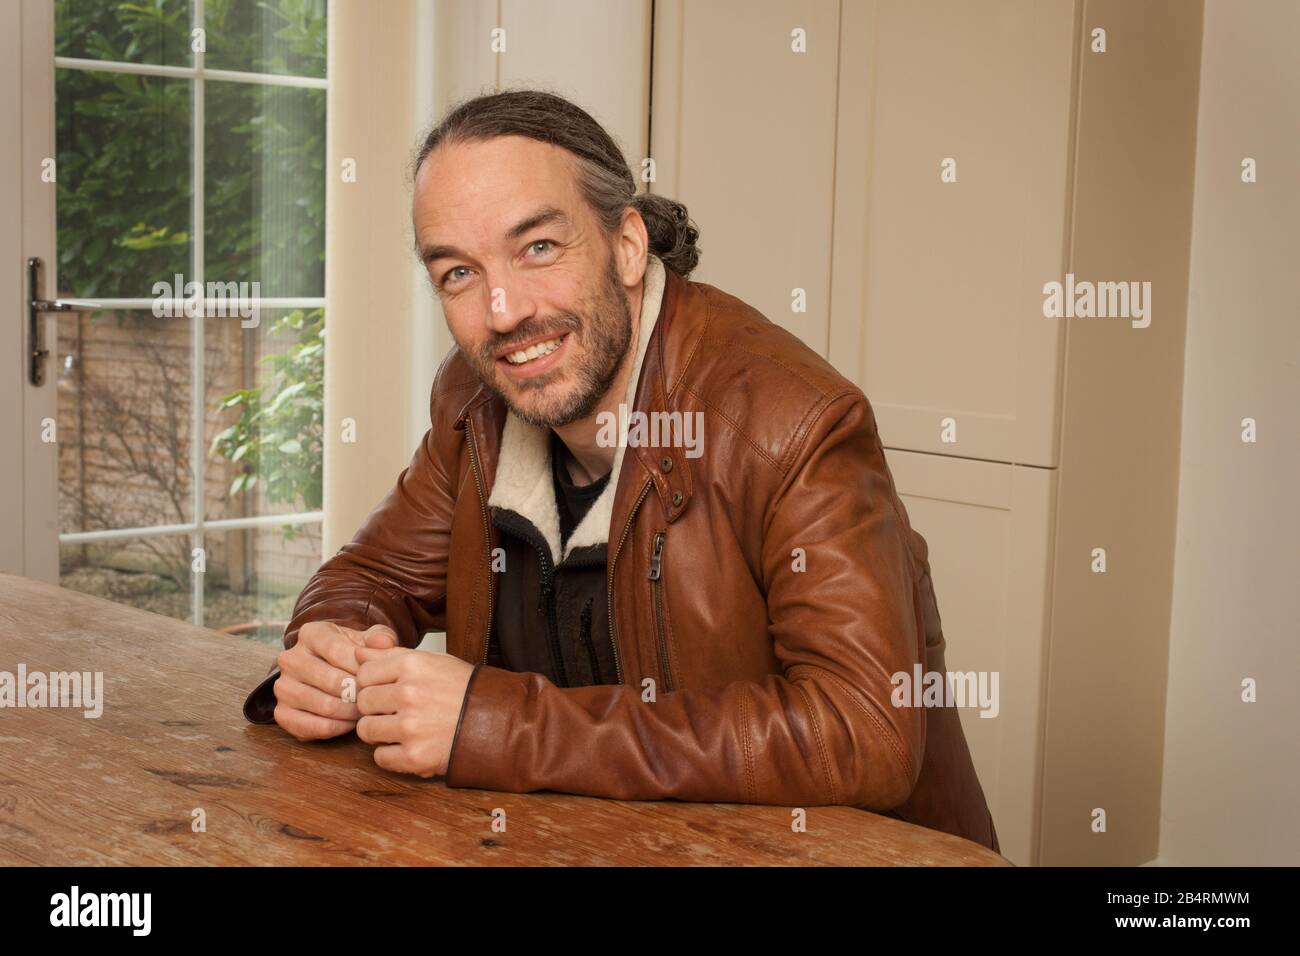 A portrait of a man sat at a table Stock Photo